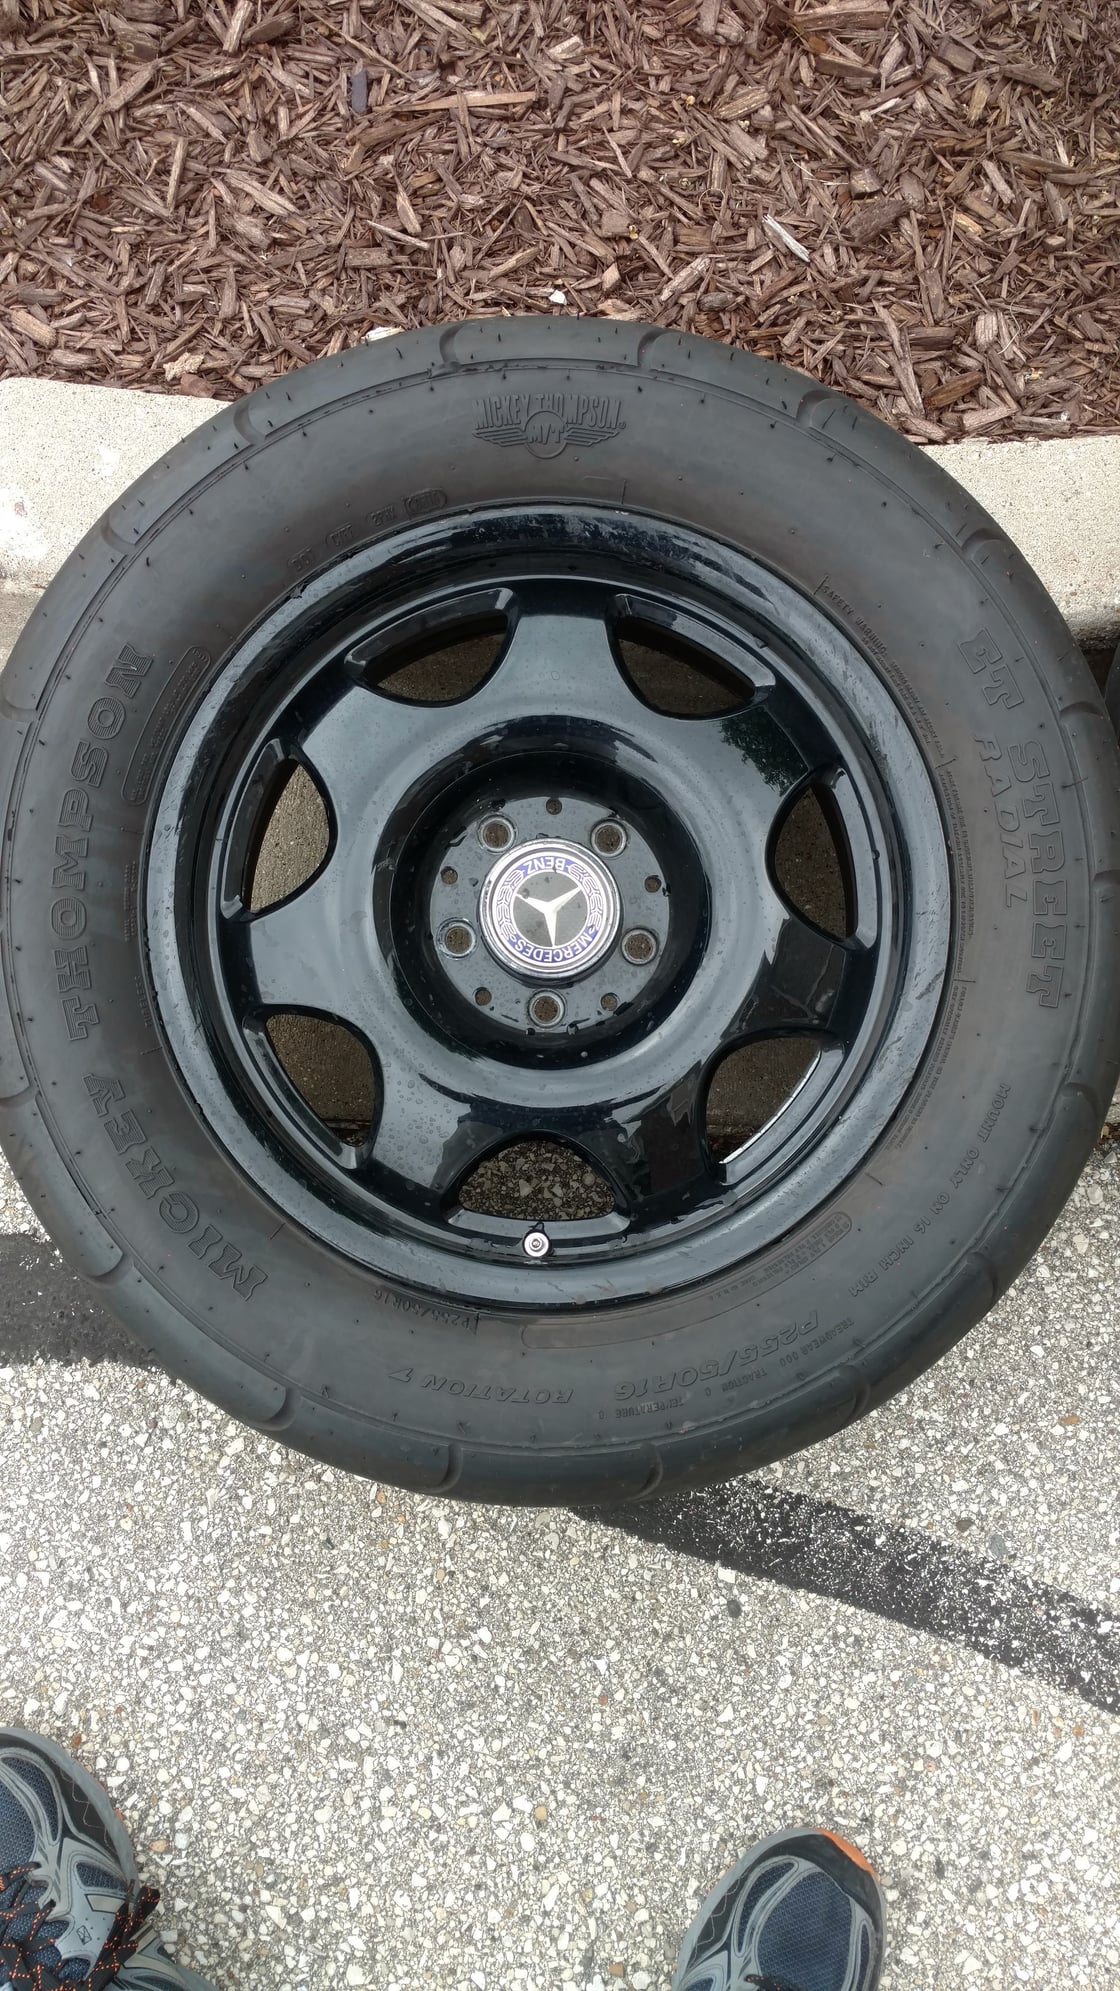 Wheels and Tires/Axles - CLK wheels with Mickey Thompson drag radials - Used - All Years Mercedes-Benz All Models - Waukesha, WI 53186, United States